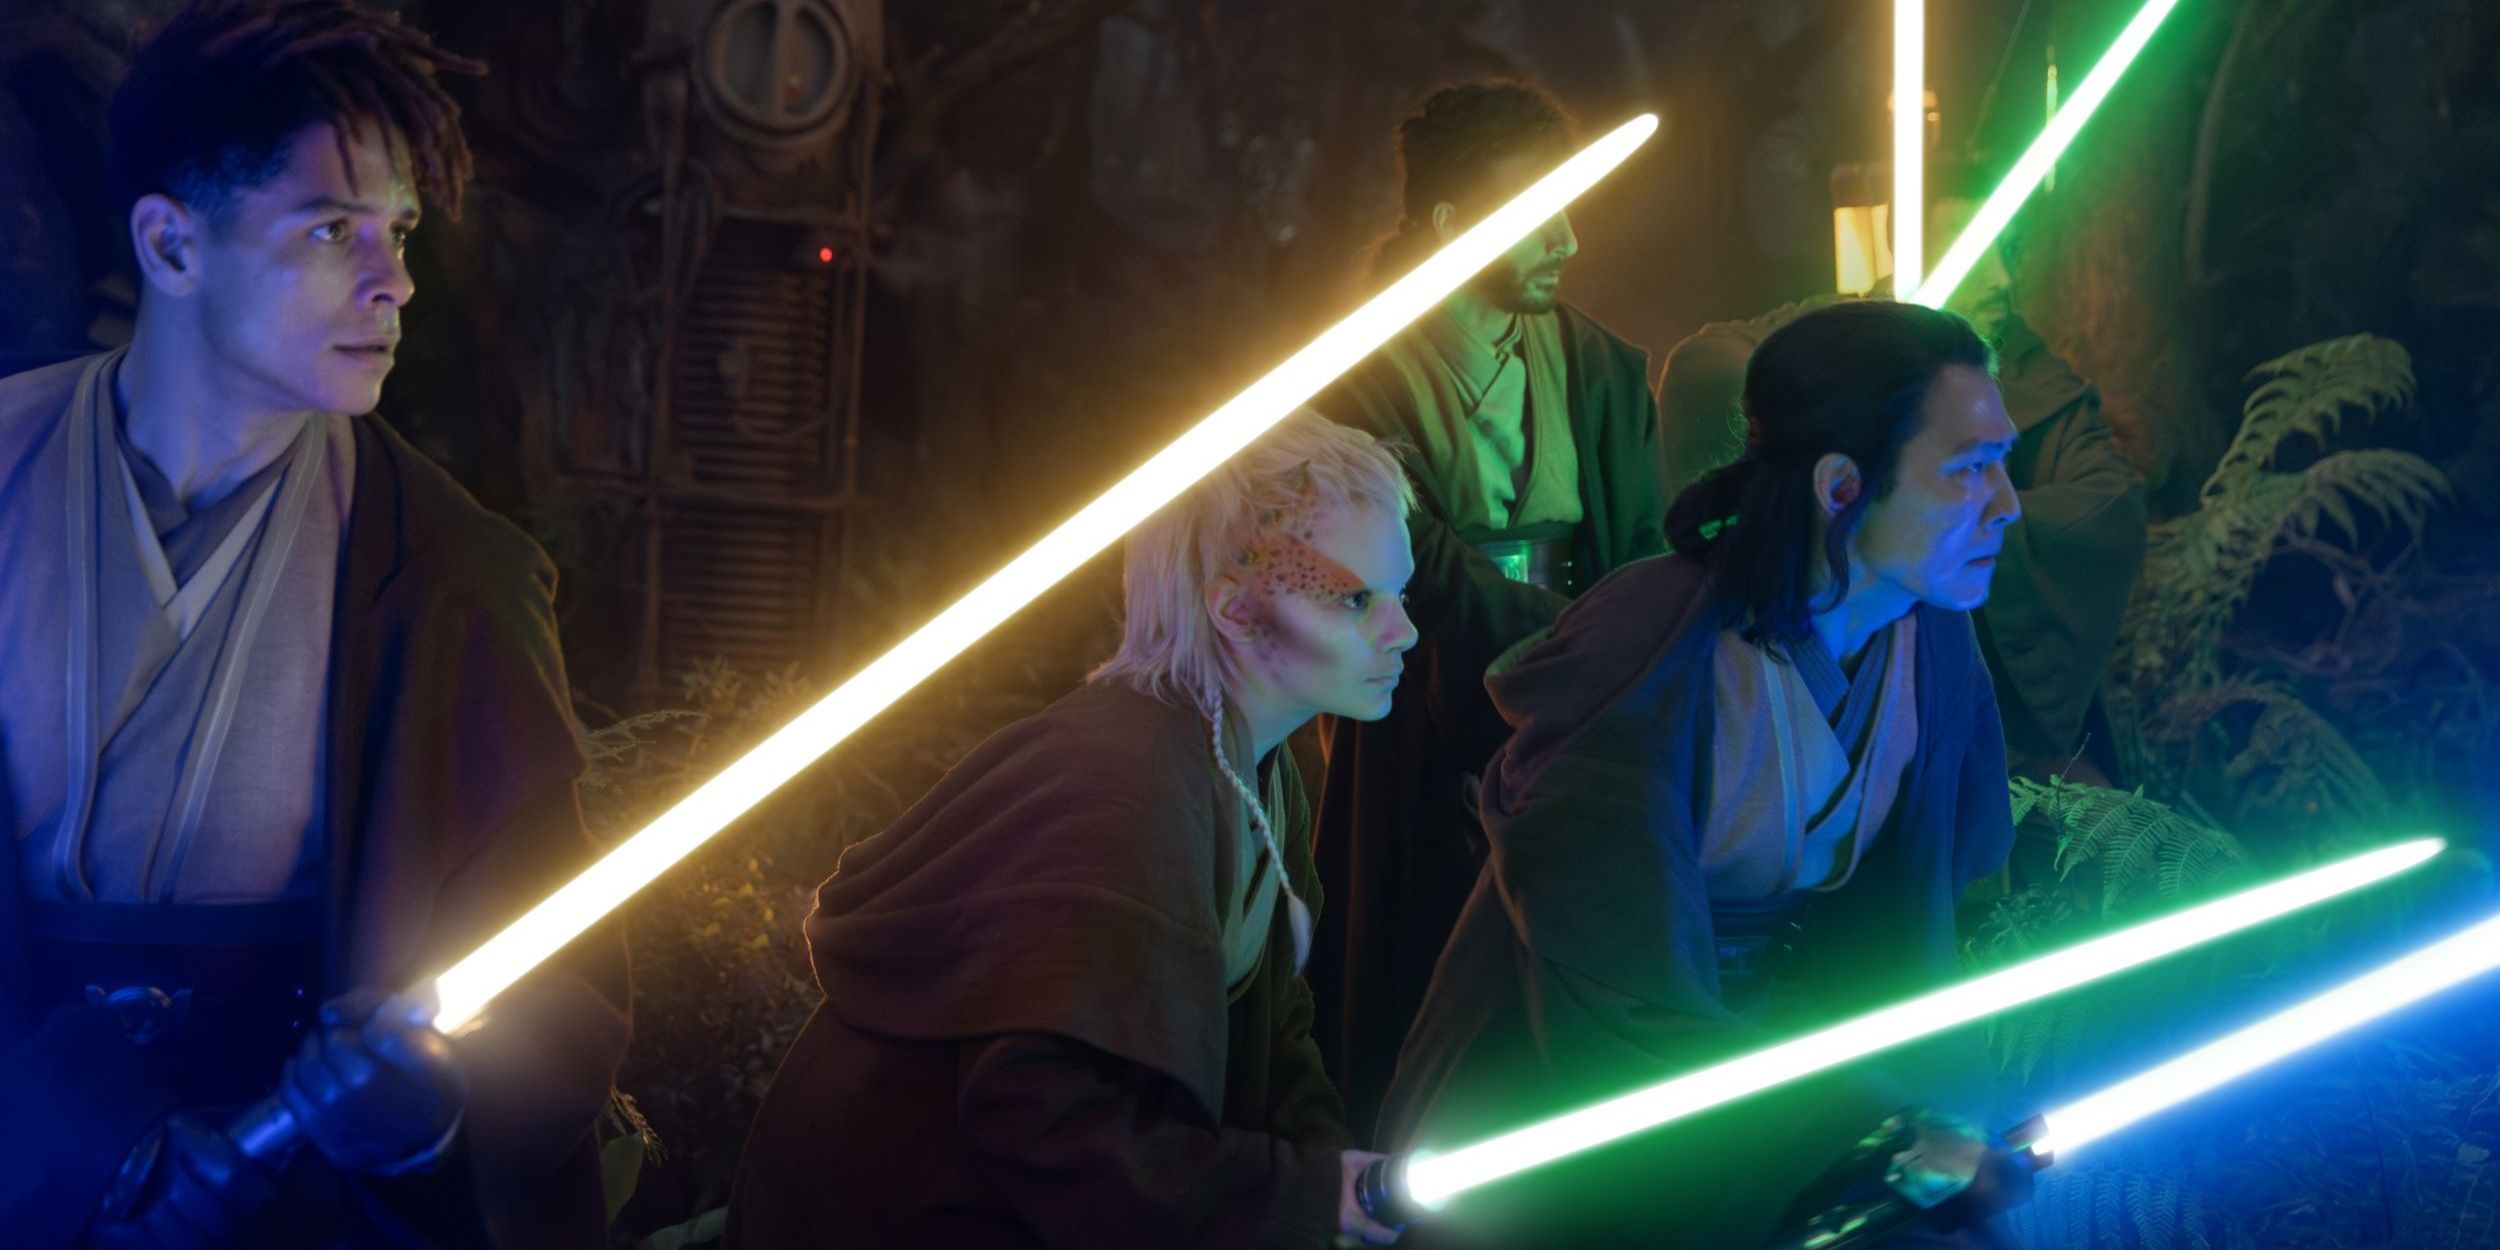 Jedi Knight Yord Fandar, Padawan Jecki Lon, and Master Sol, along with others, brandish lightsabers in multiple different colors in a dark forest in Star Wars: The Acolyte